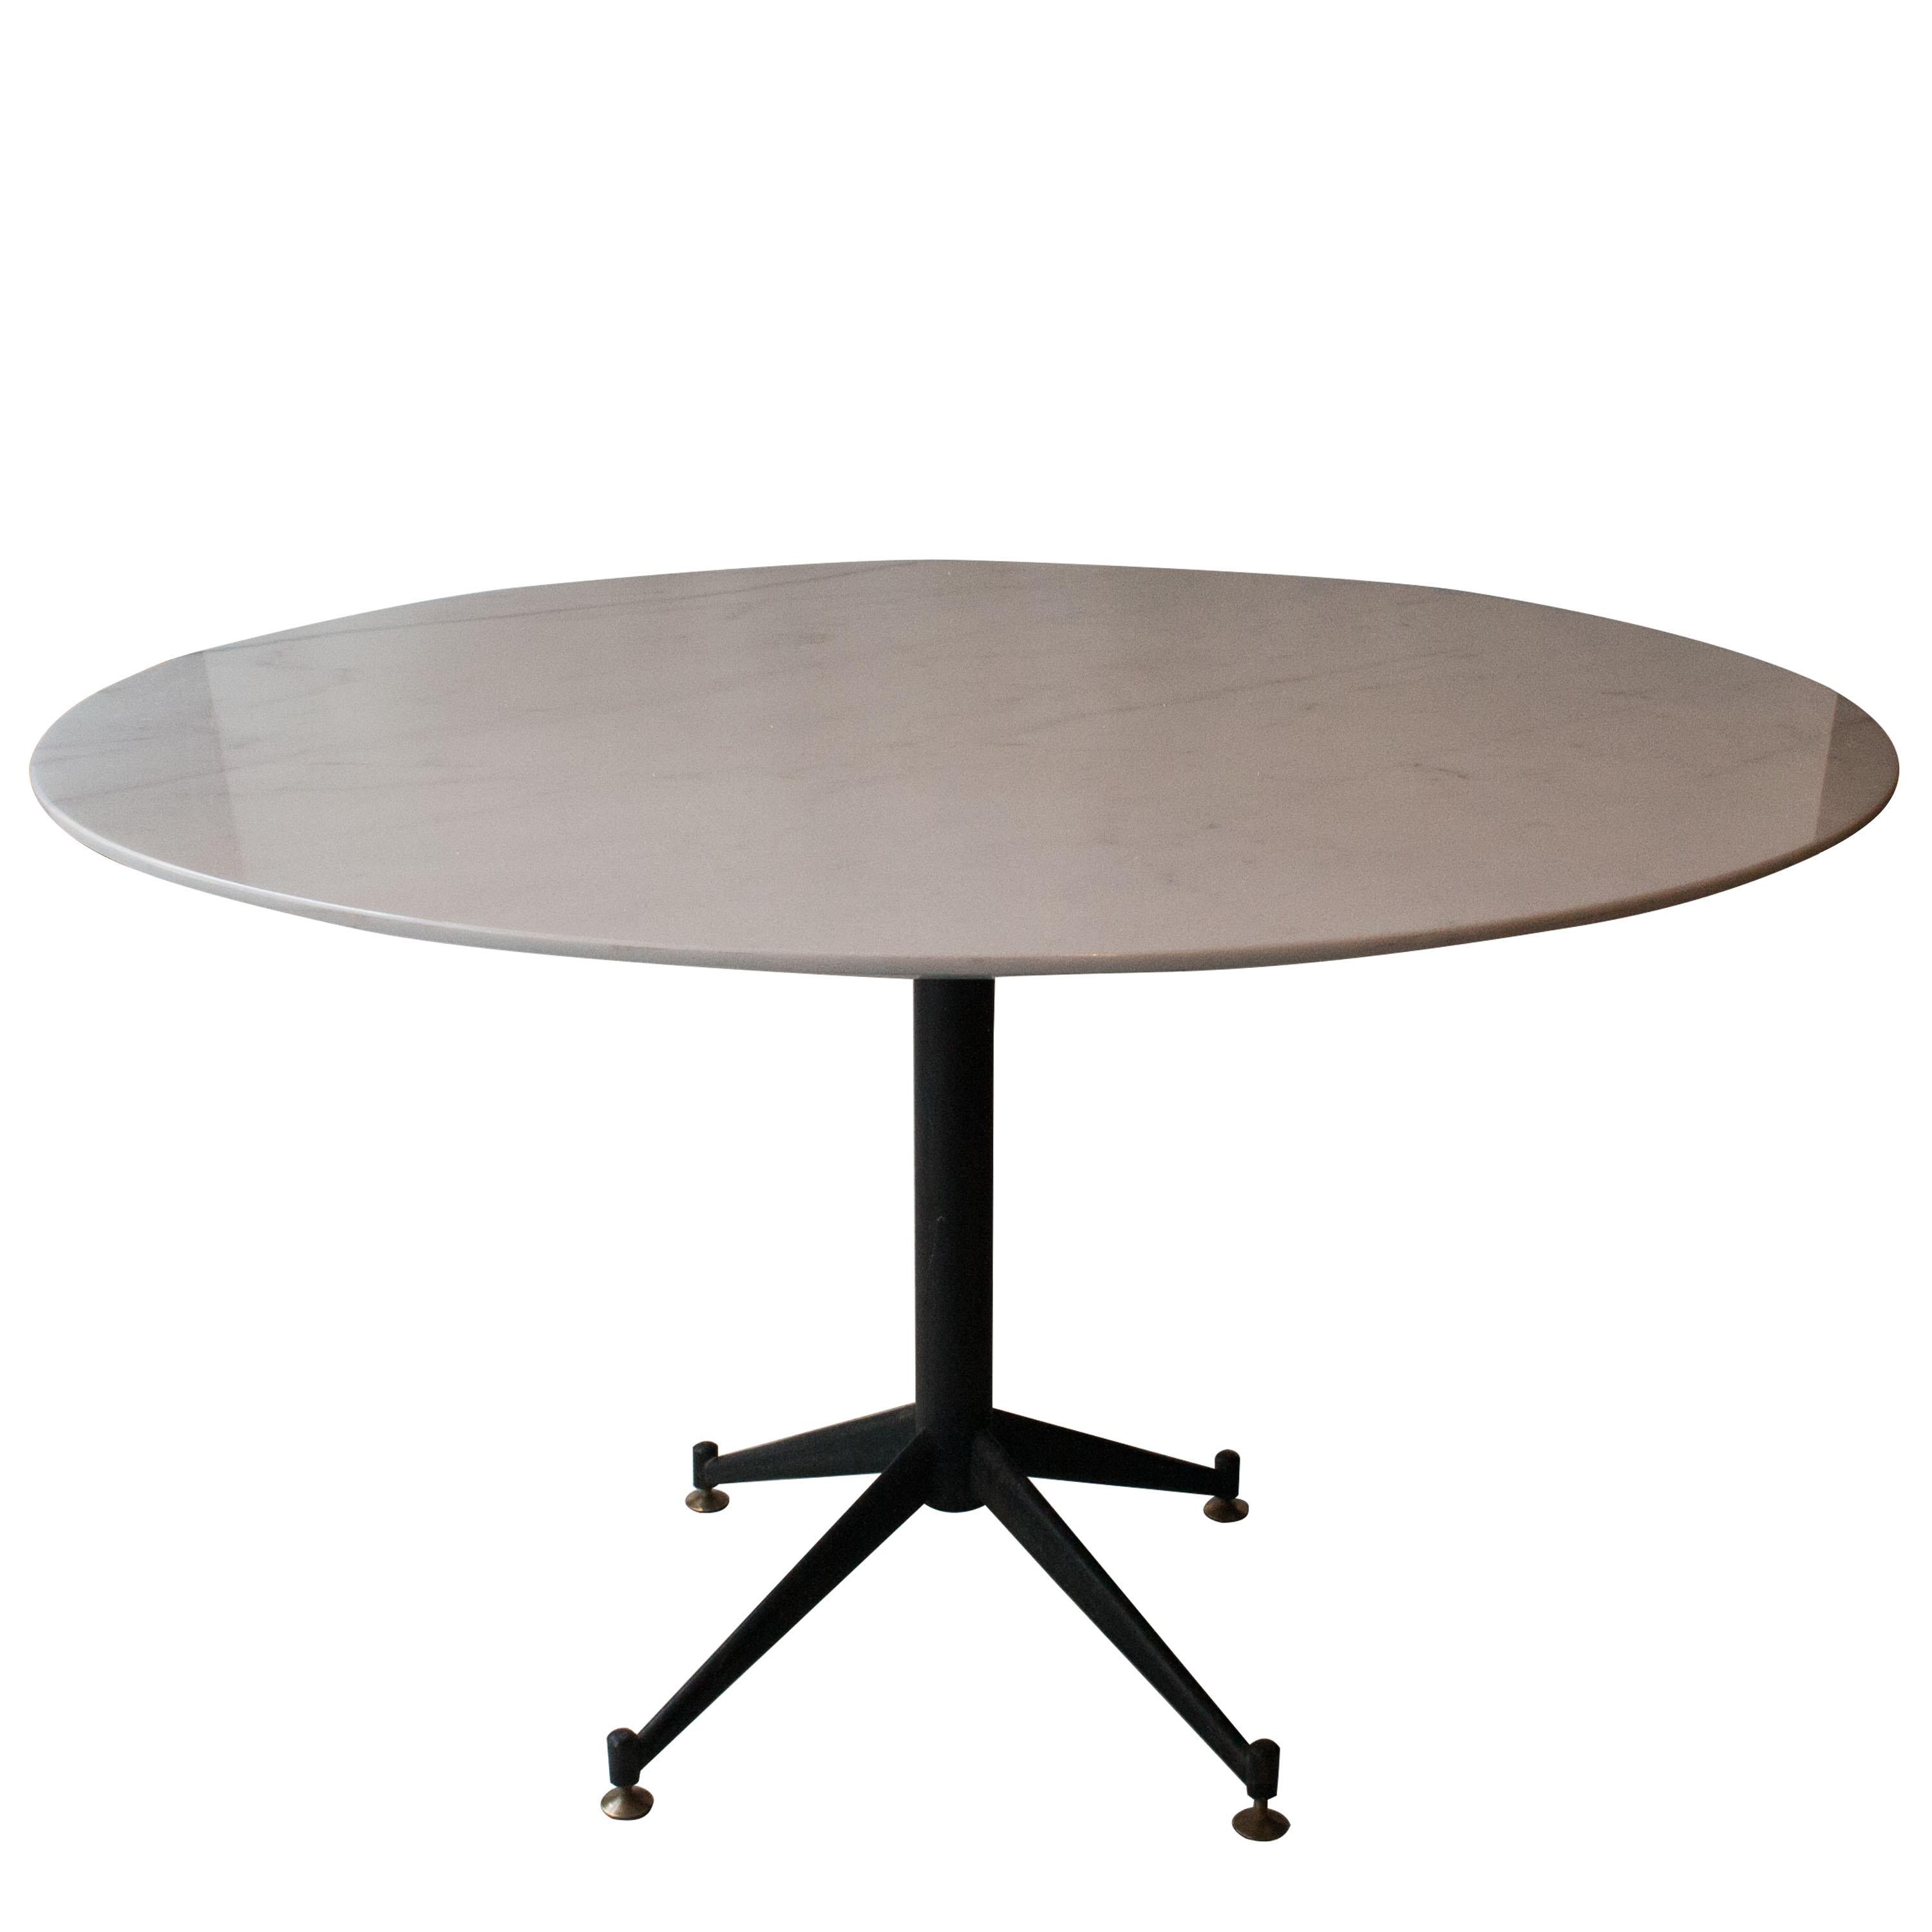 Round dining table with white Ibiza marble-top and metal foot with black lacquered four feet support with height adjustable pads.